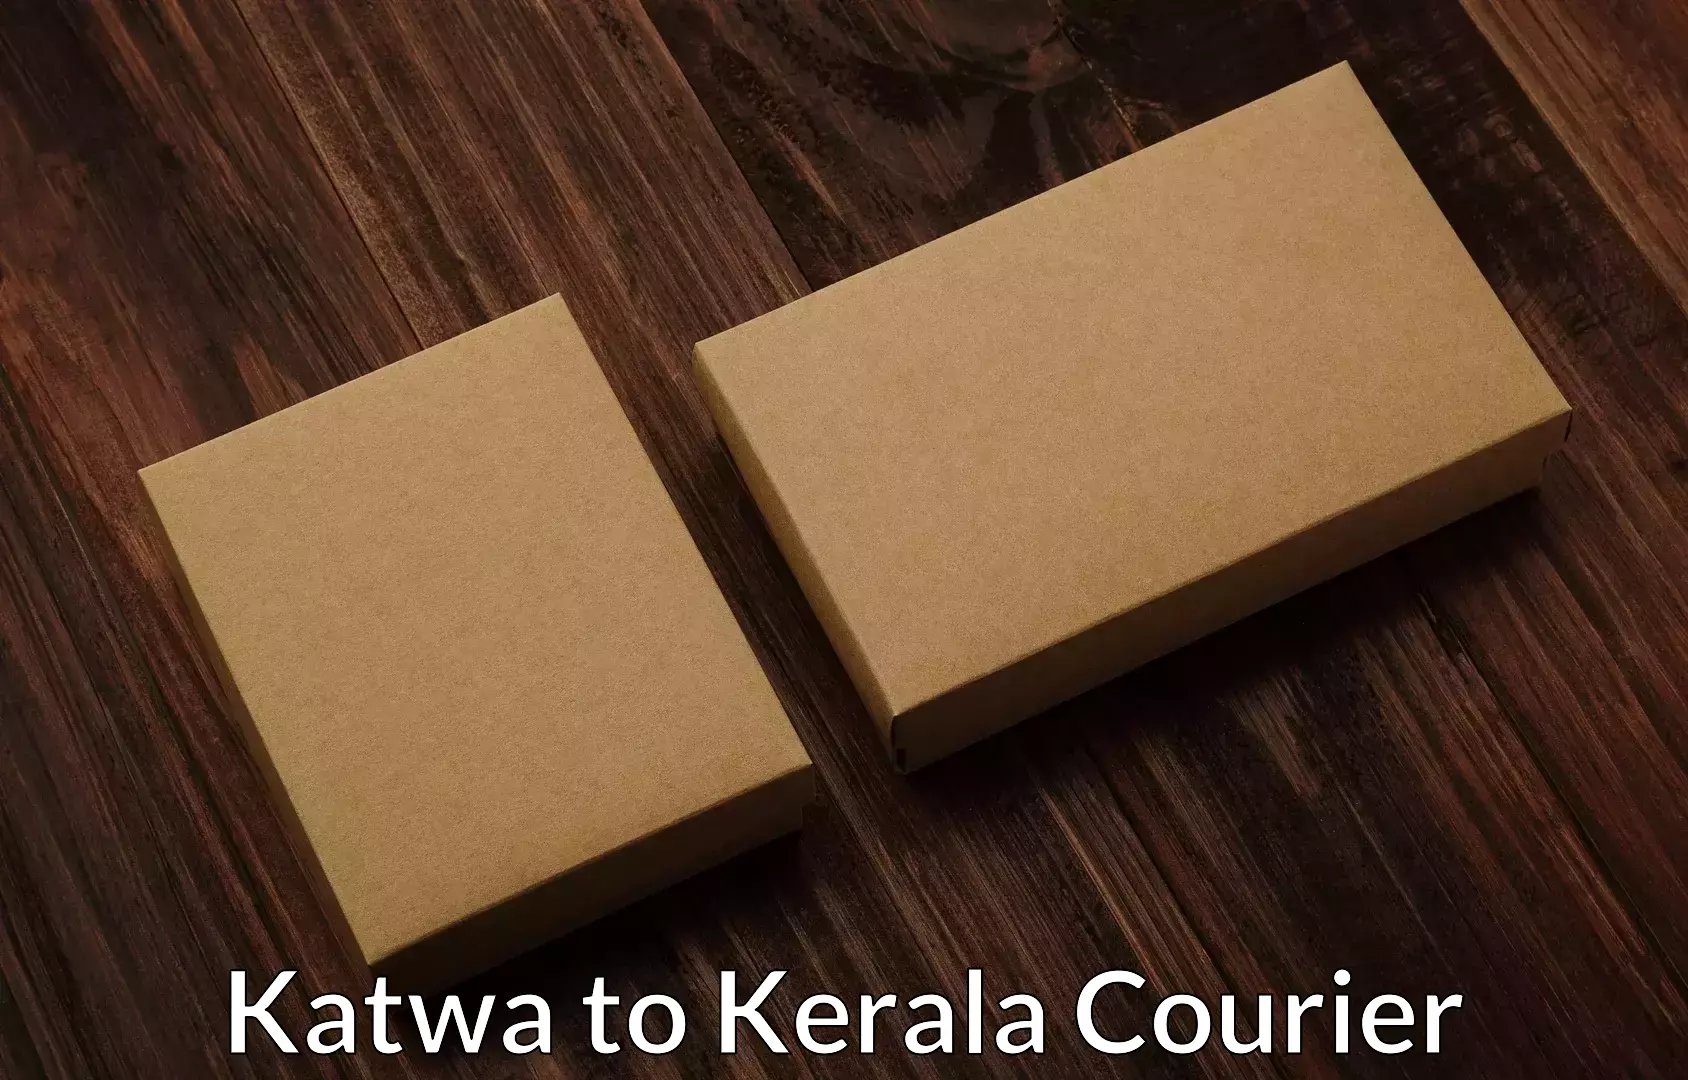 Trusted relocation experts Katwa to Kerala